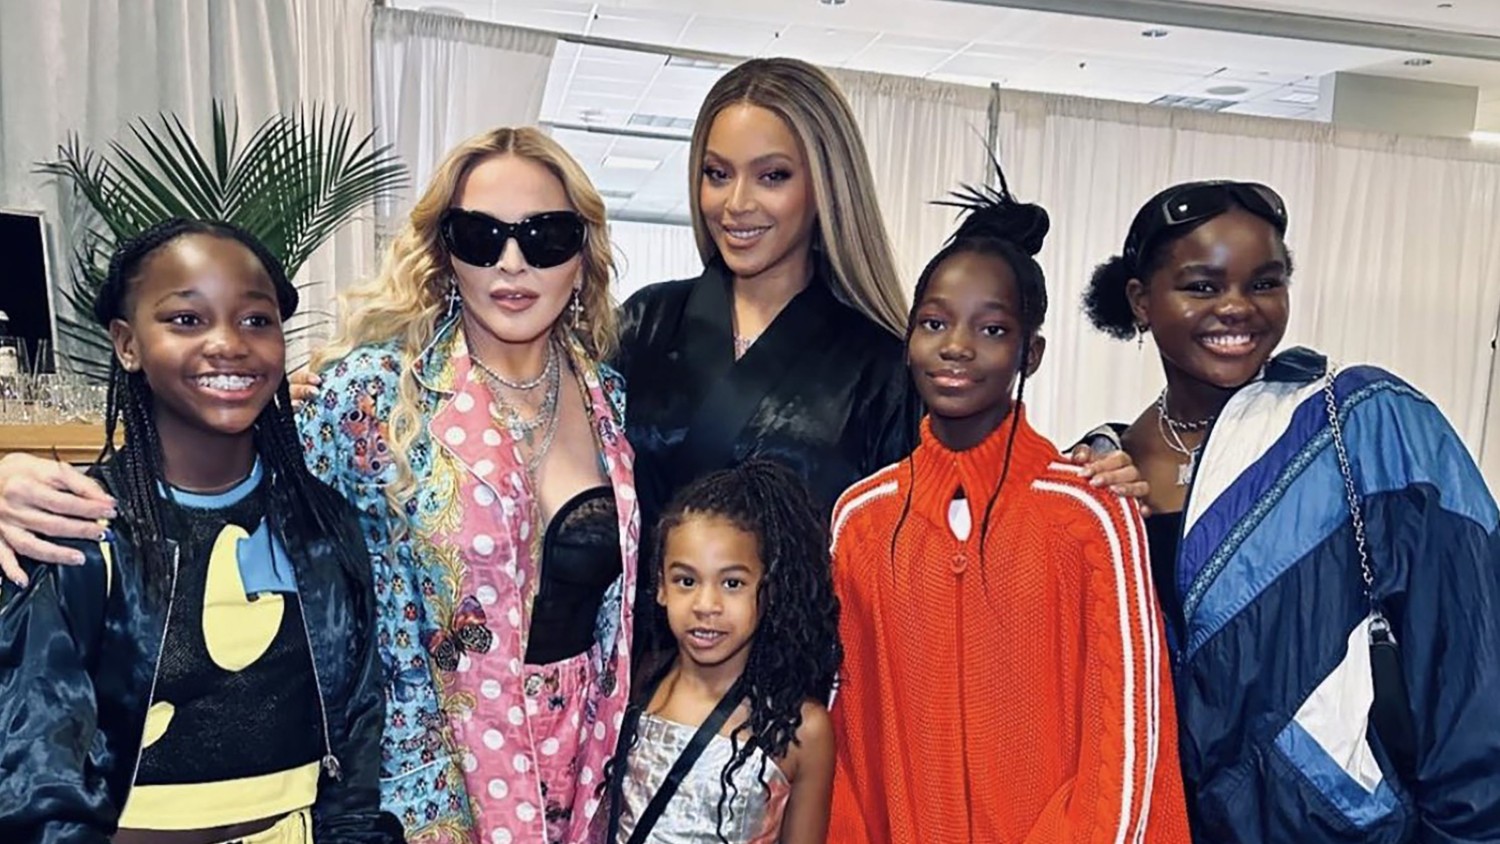 madonna/Instagram - Madonna and three of her daughters Stella, Estere and Mercy with Beyoncé and daughter Rumi in New York over the weekend.